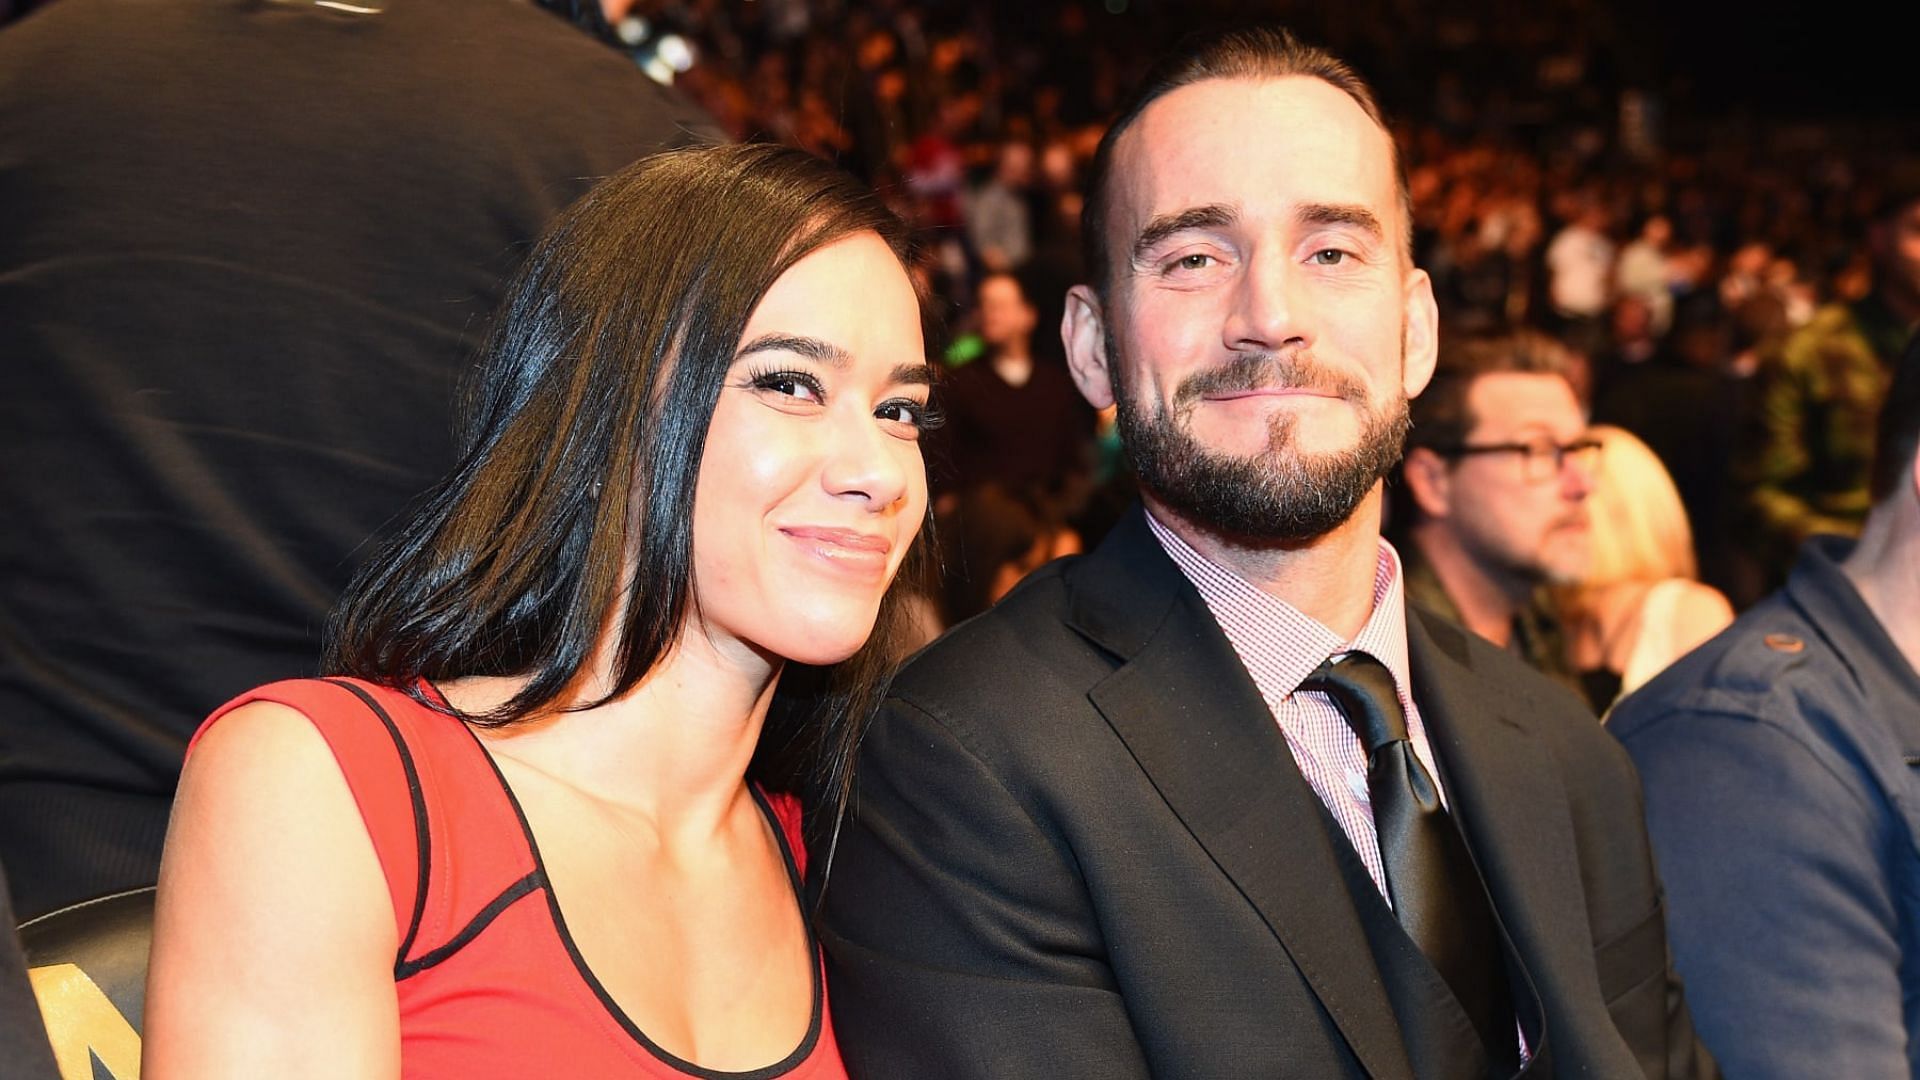 CM Punk and AJ Lee were married in 2014